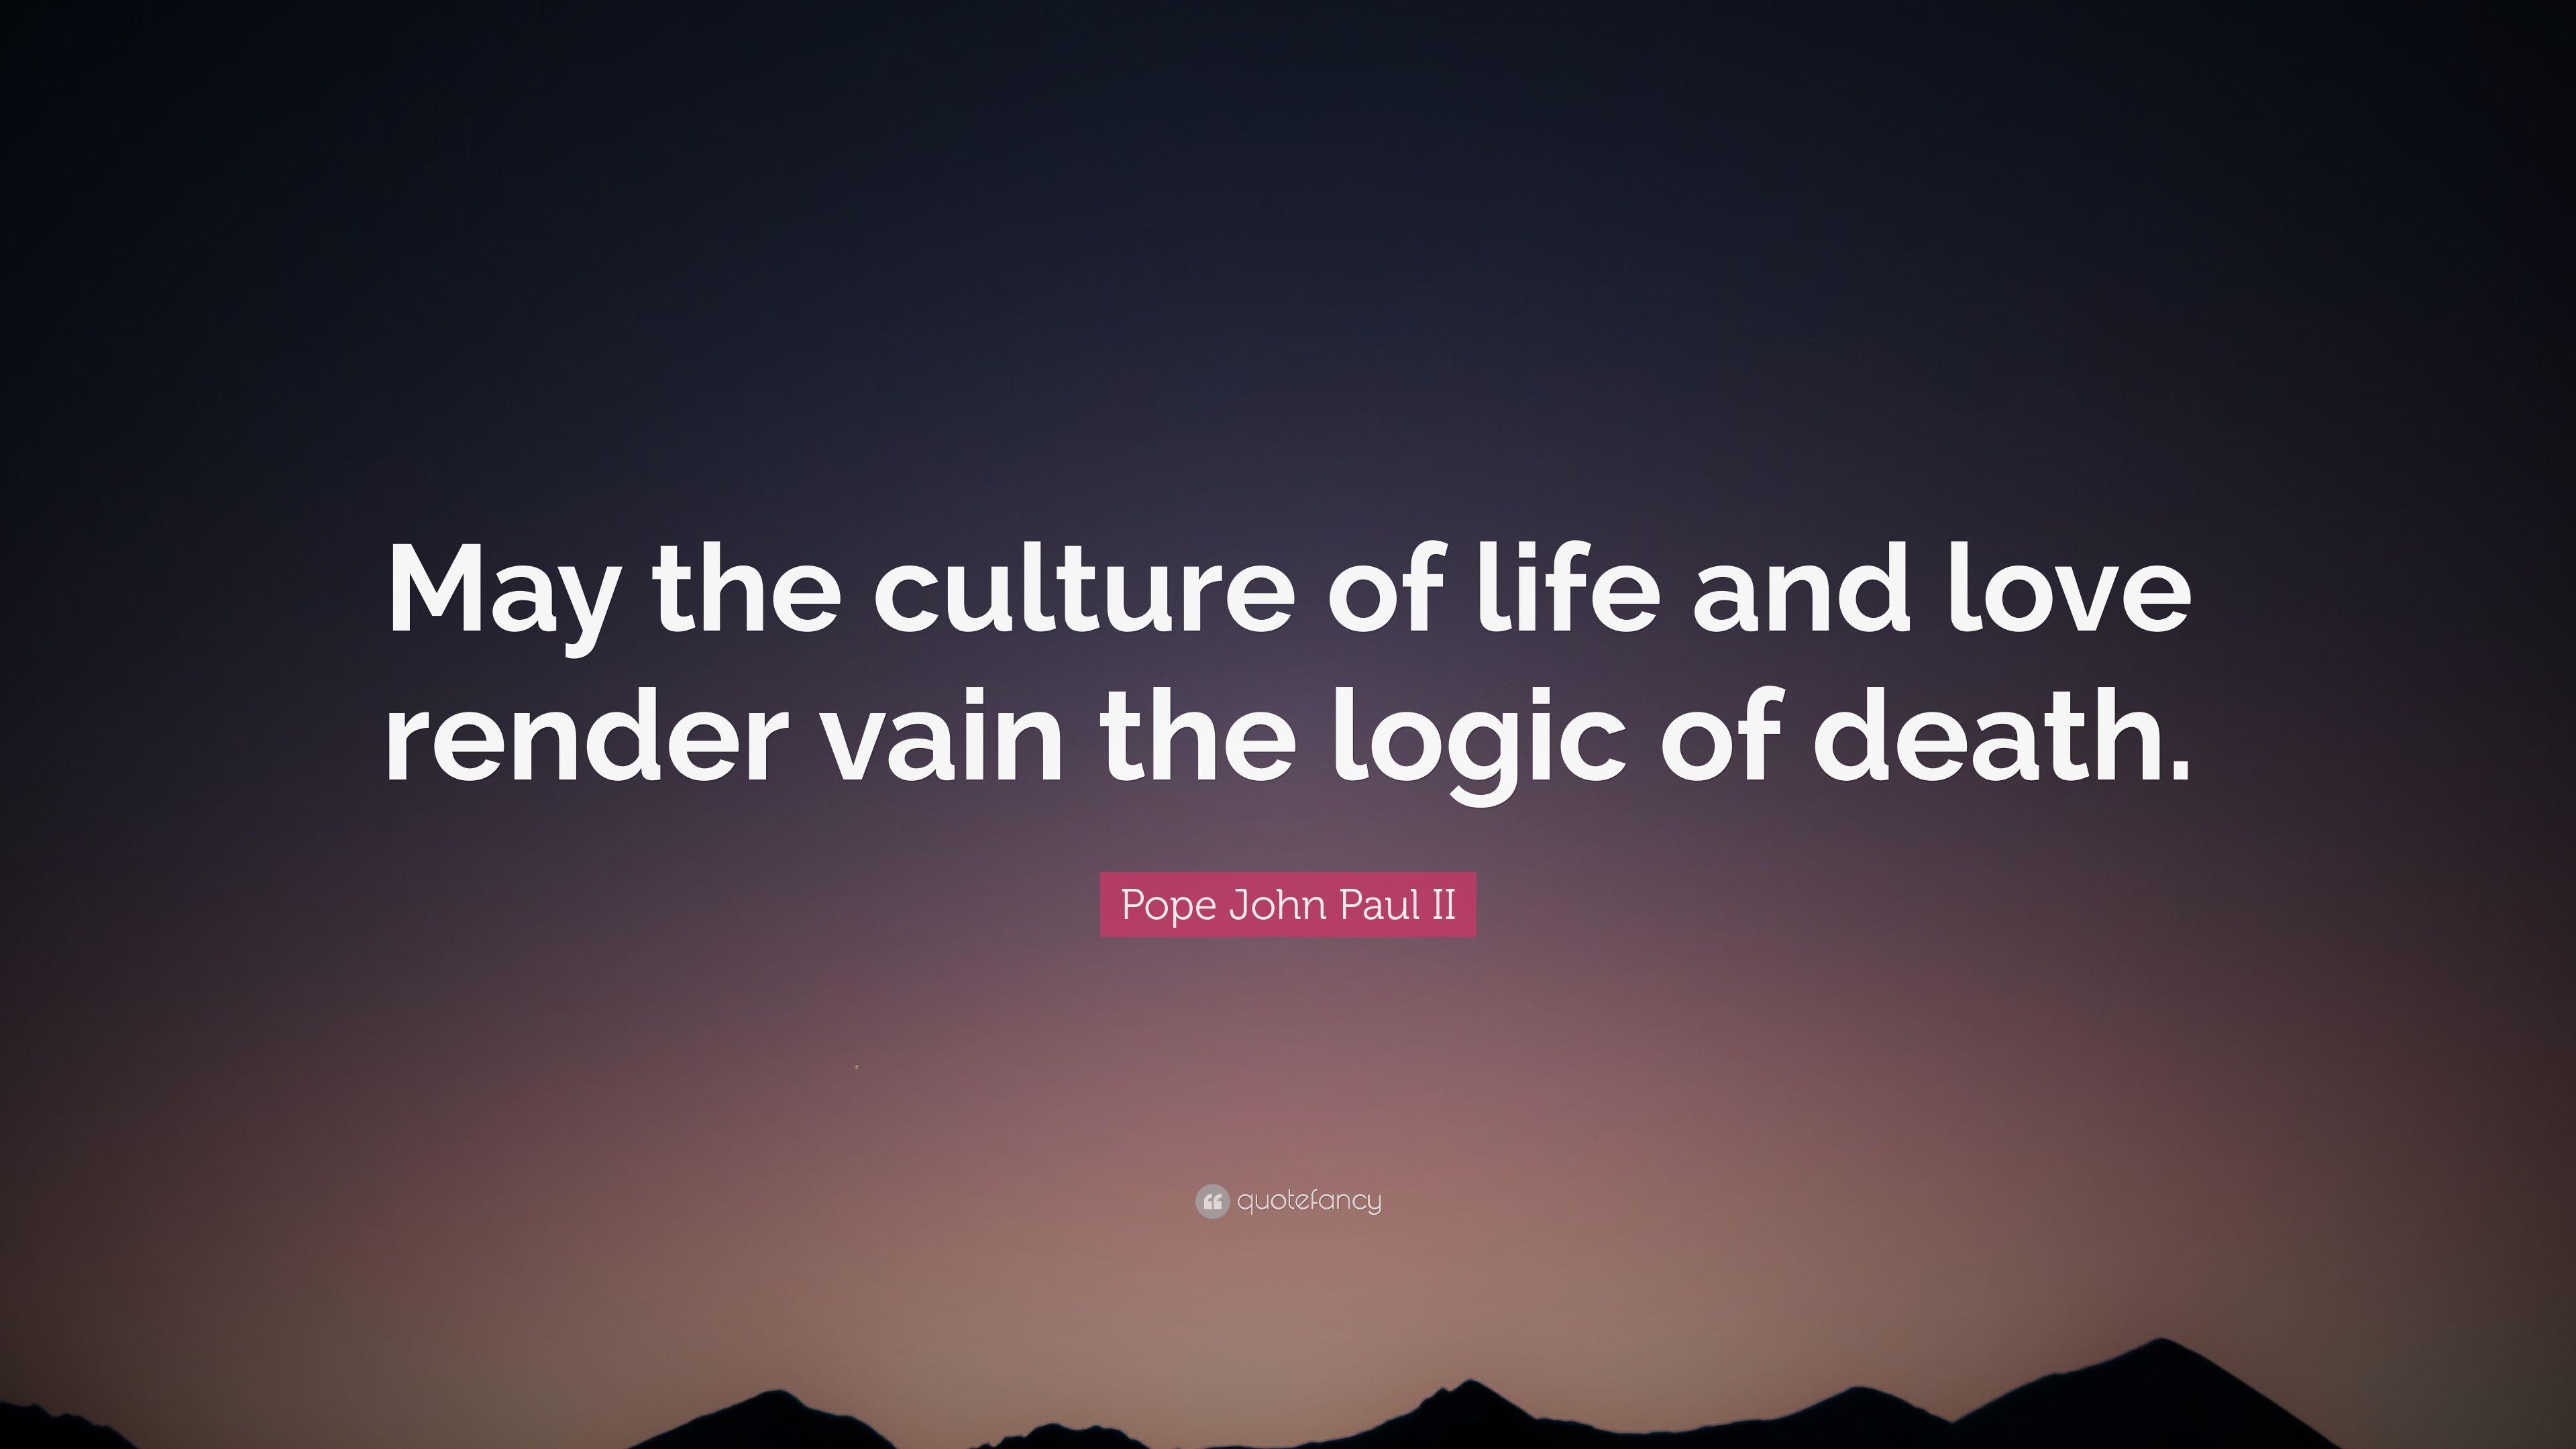 Pope John Paul II Quote: “May the culture of life and love render